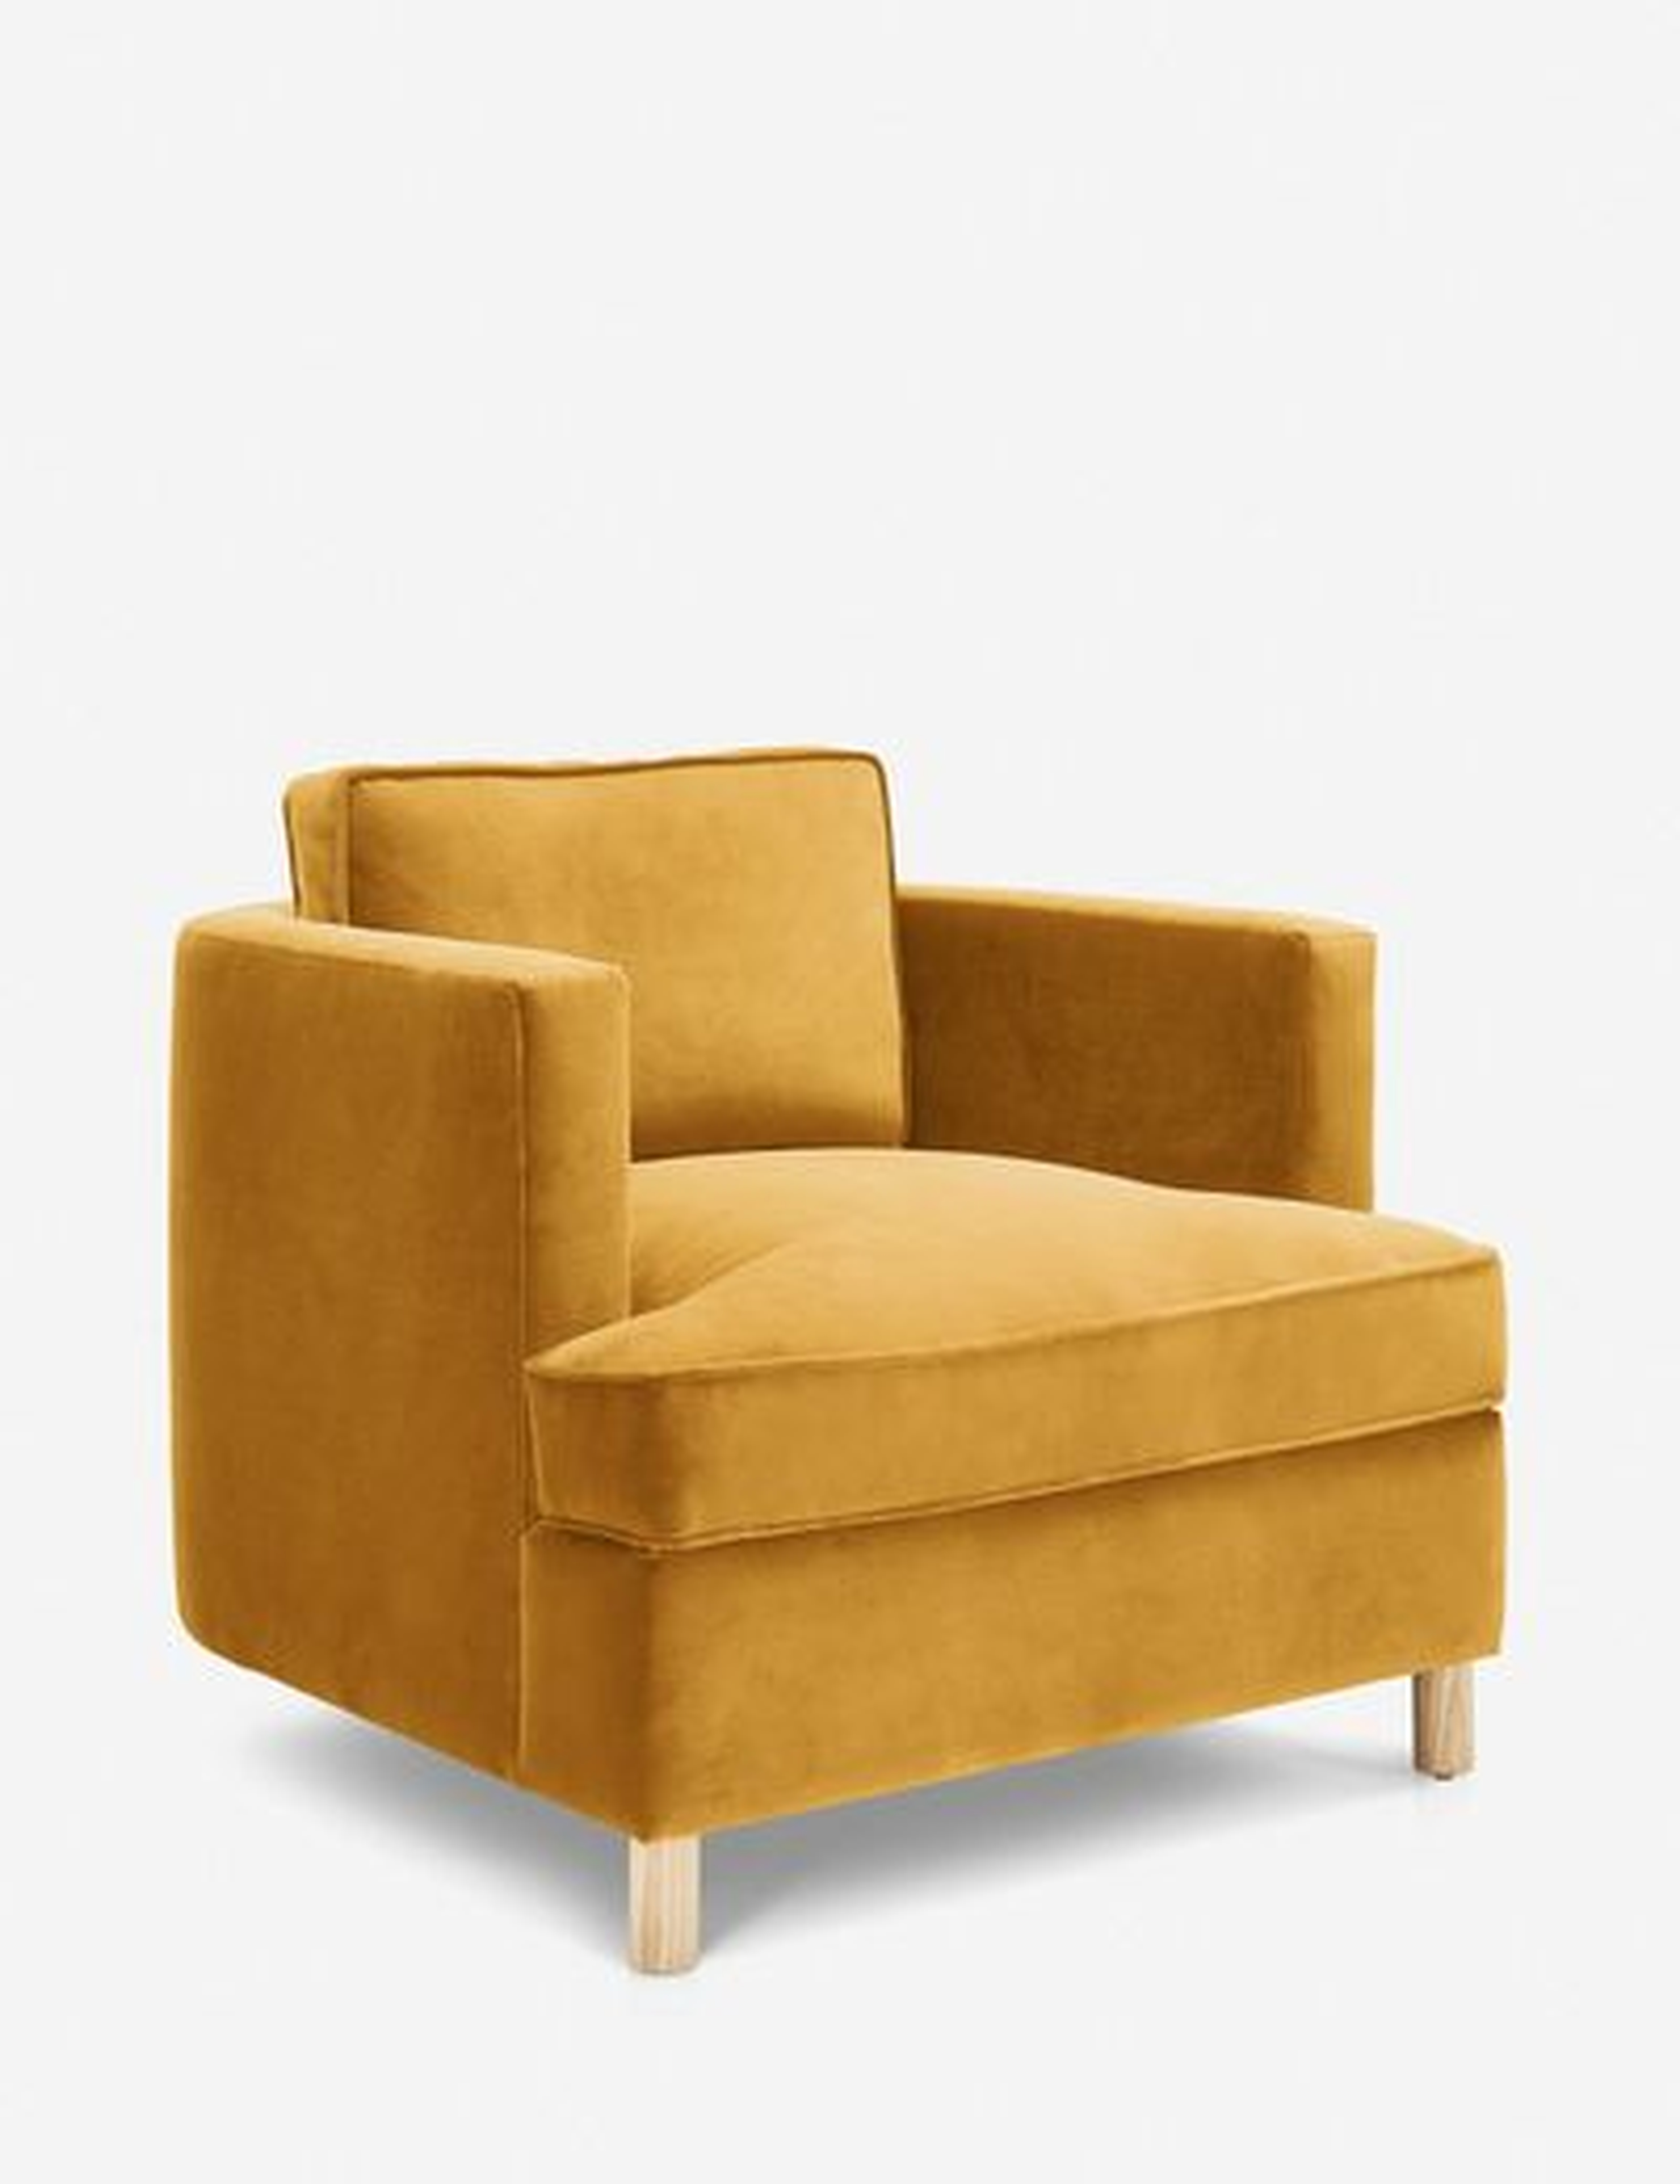 Belmont Accent Chair by Ginny Macdonald - Lulu and Georgia